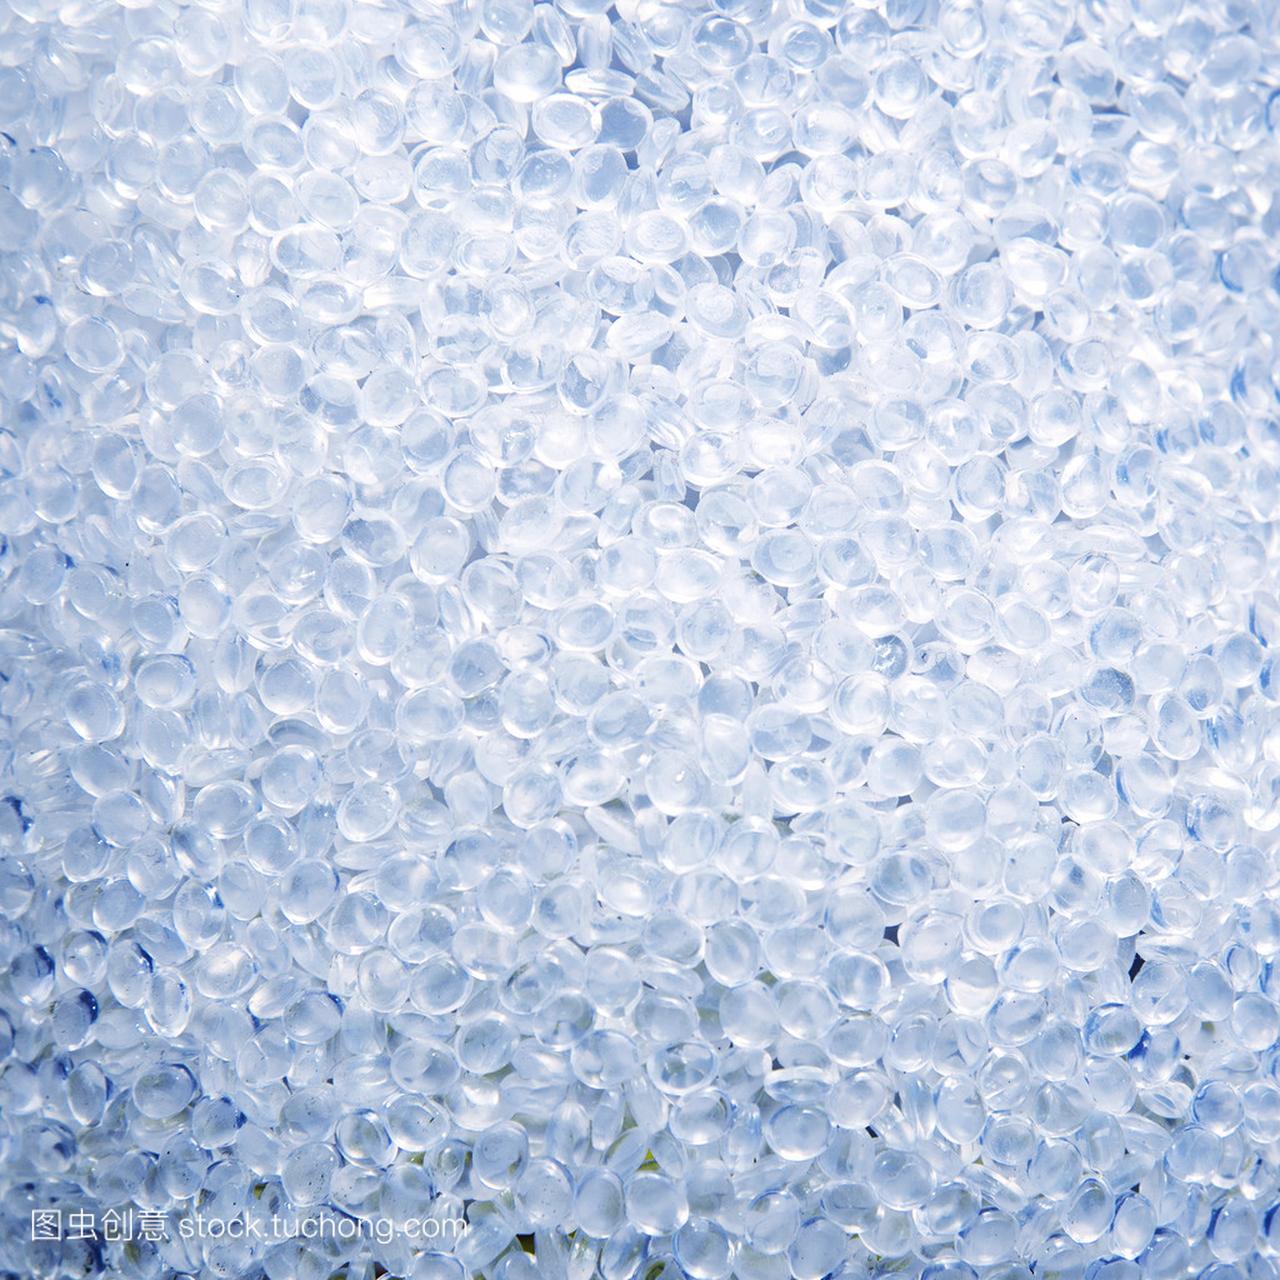 Blue ice glass stones backgrounds. Relief 